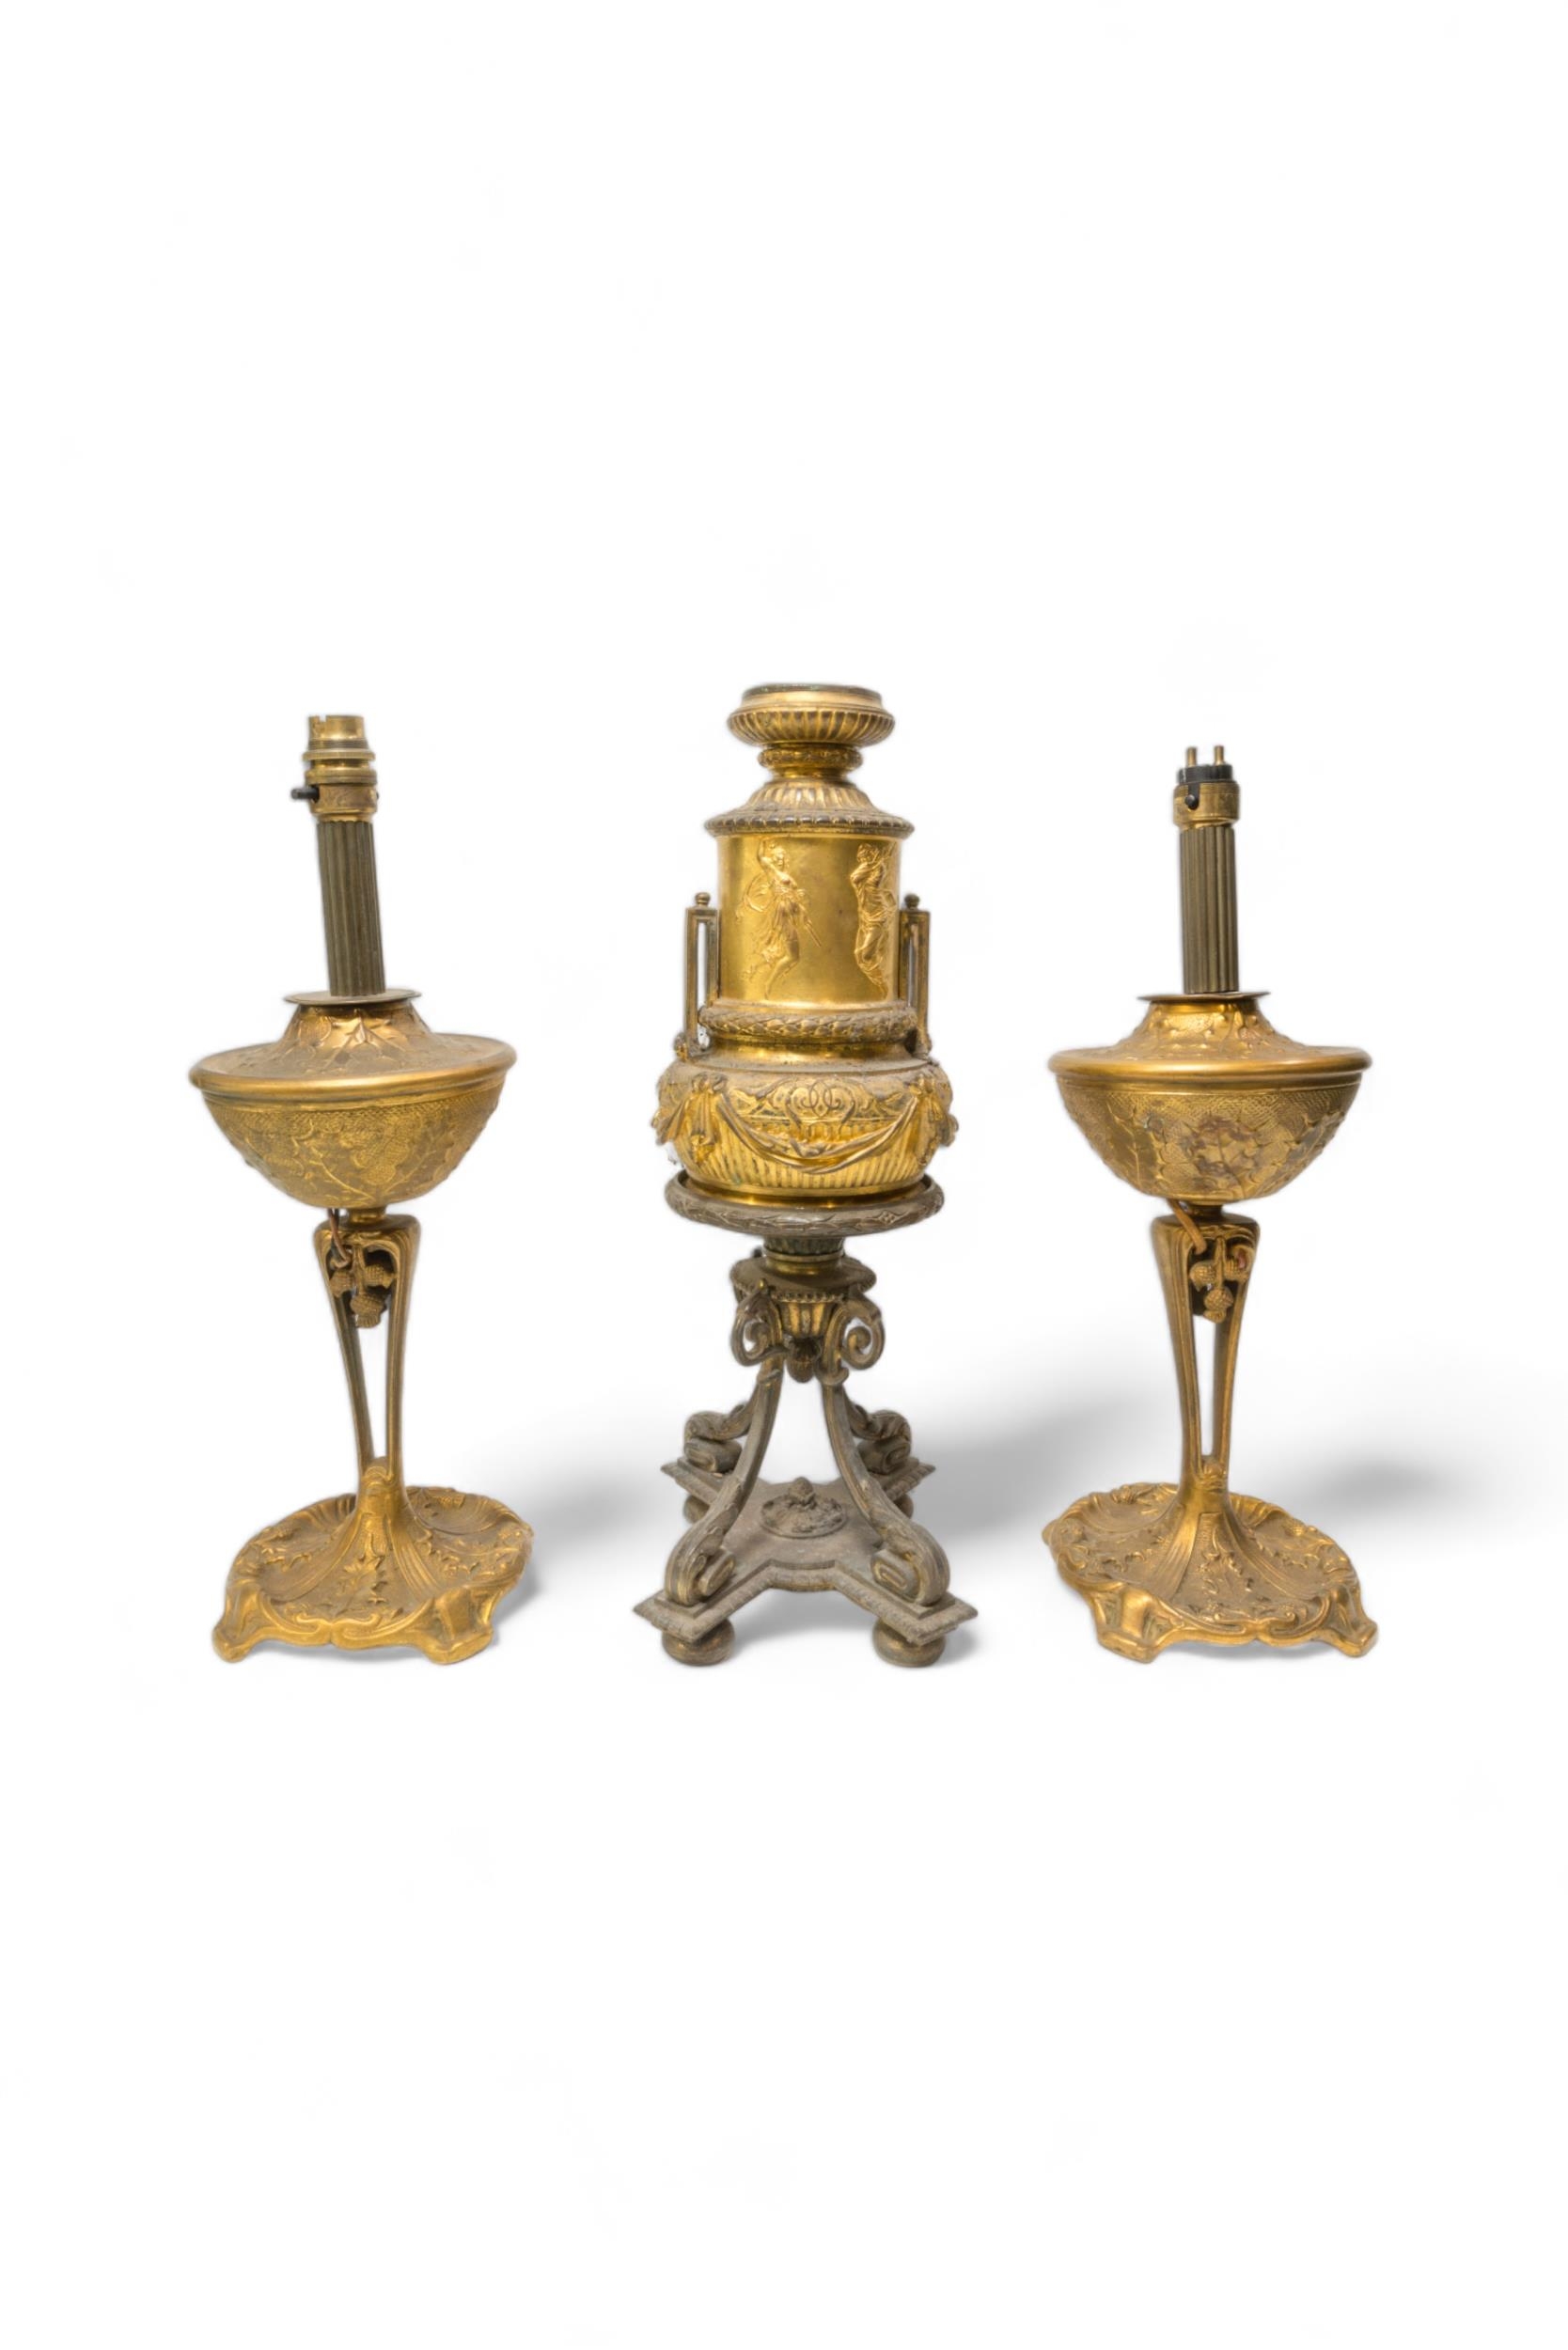 A PAIR OF BRASS OIL LAMP BASES DECORATED WITH HOLLY AND THISTLES, early 20th century and later - Image 3 of 3